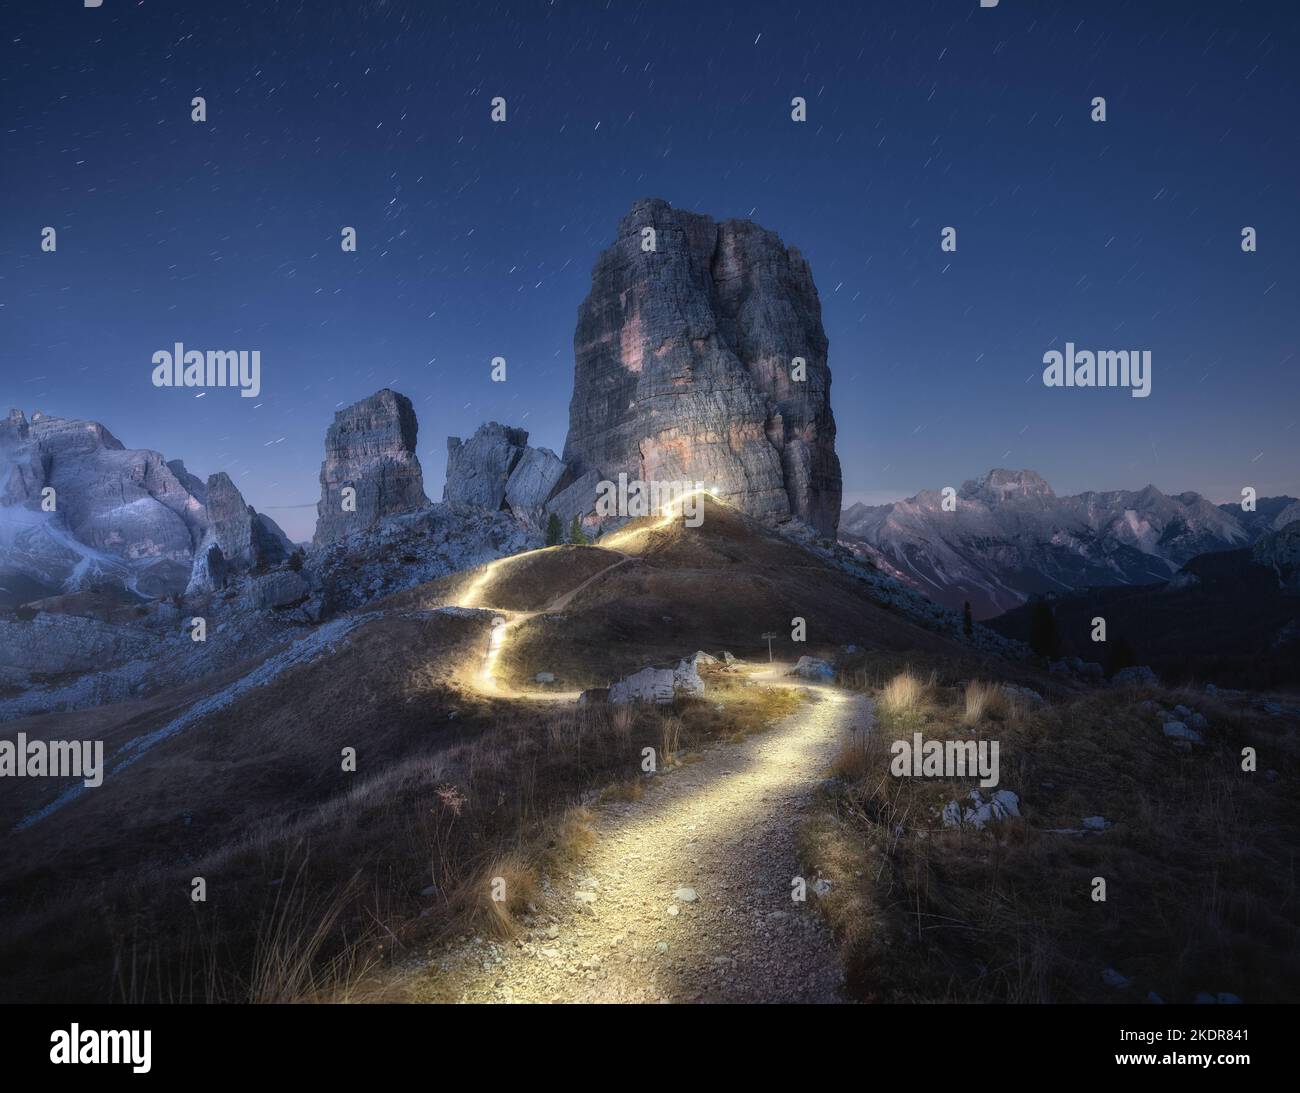 Flashlight trails on mountain path against high rocks at night Stock Photo